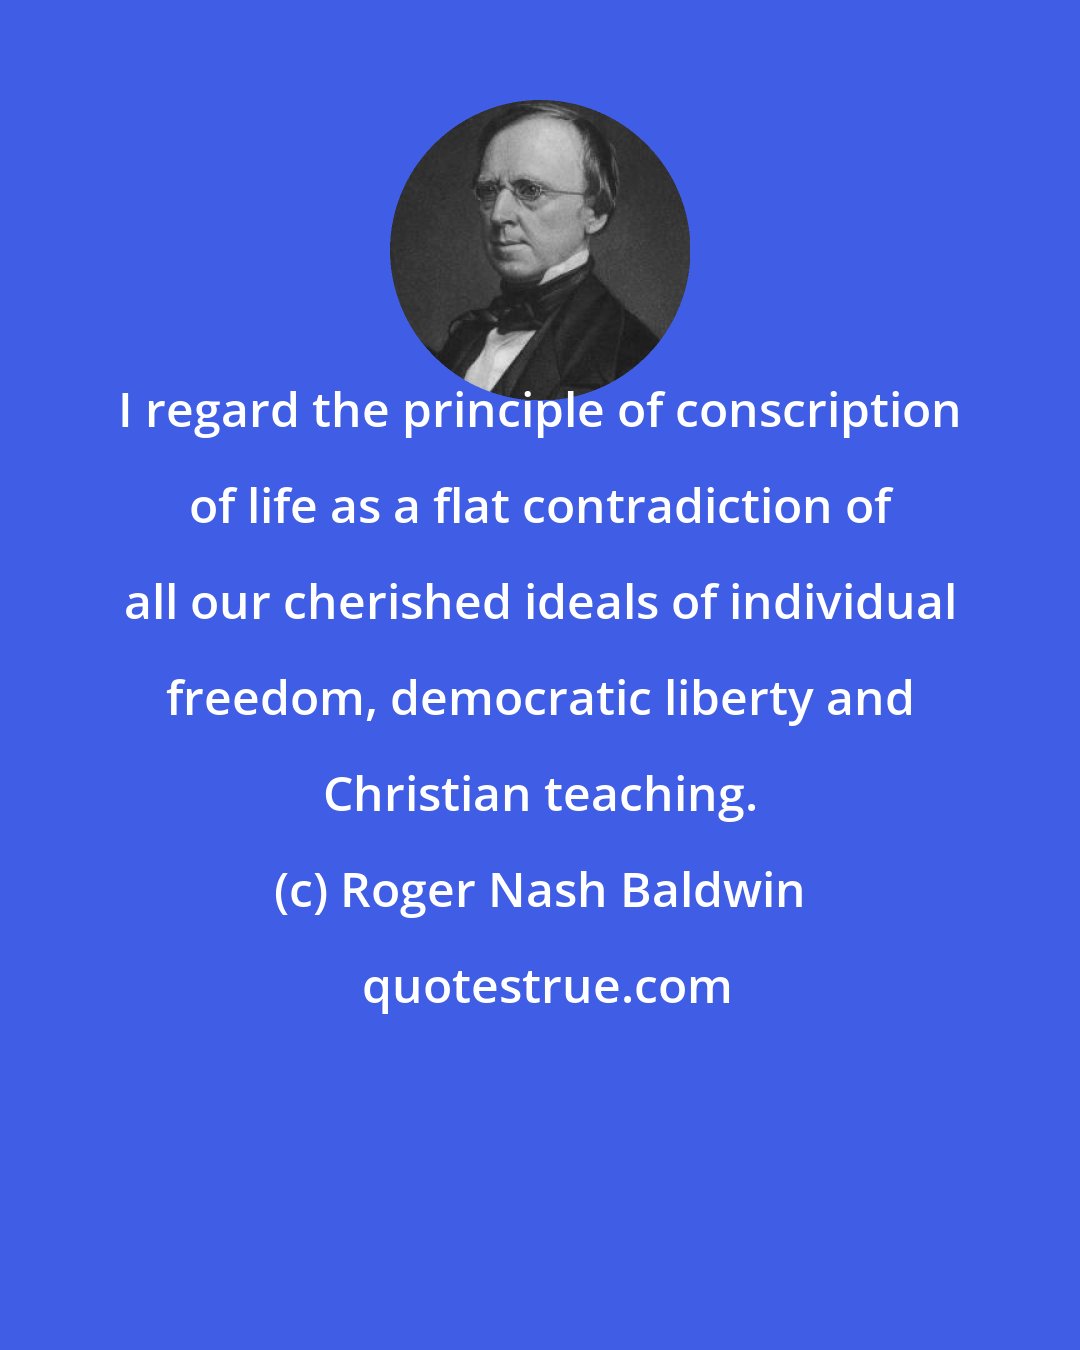 Roger Nash Baldwin: I regard the principle of conscription of life as a flat contradiction of all our cherished ideals of individual freedom, democratic liberty and Christian teaching.